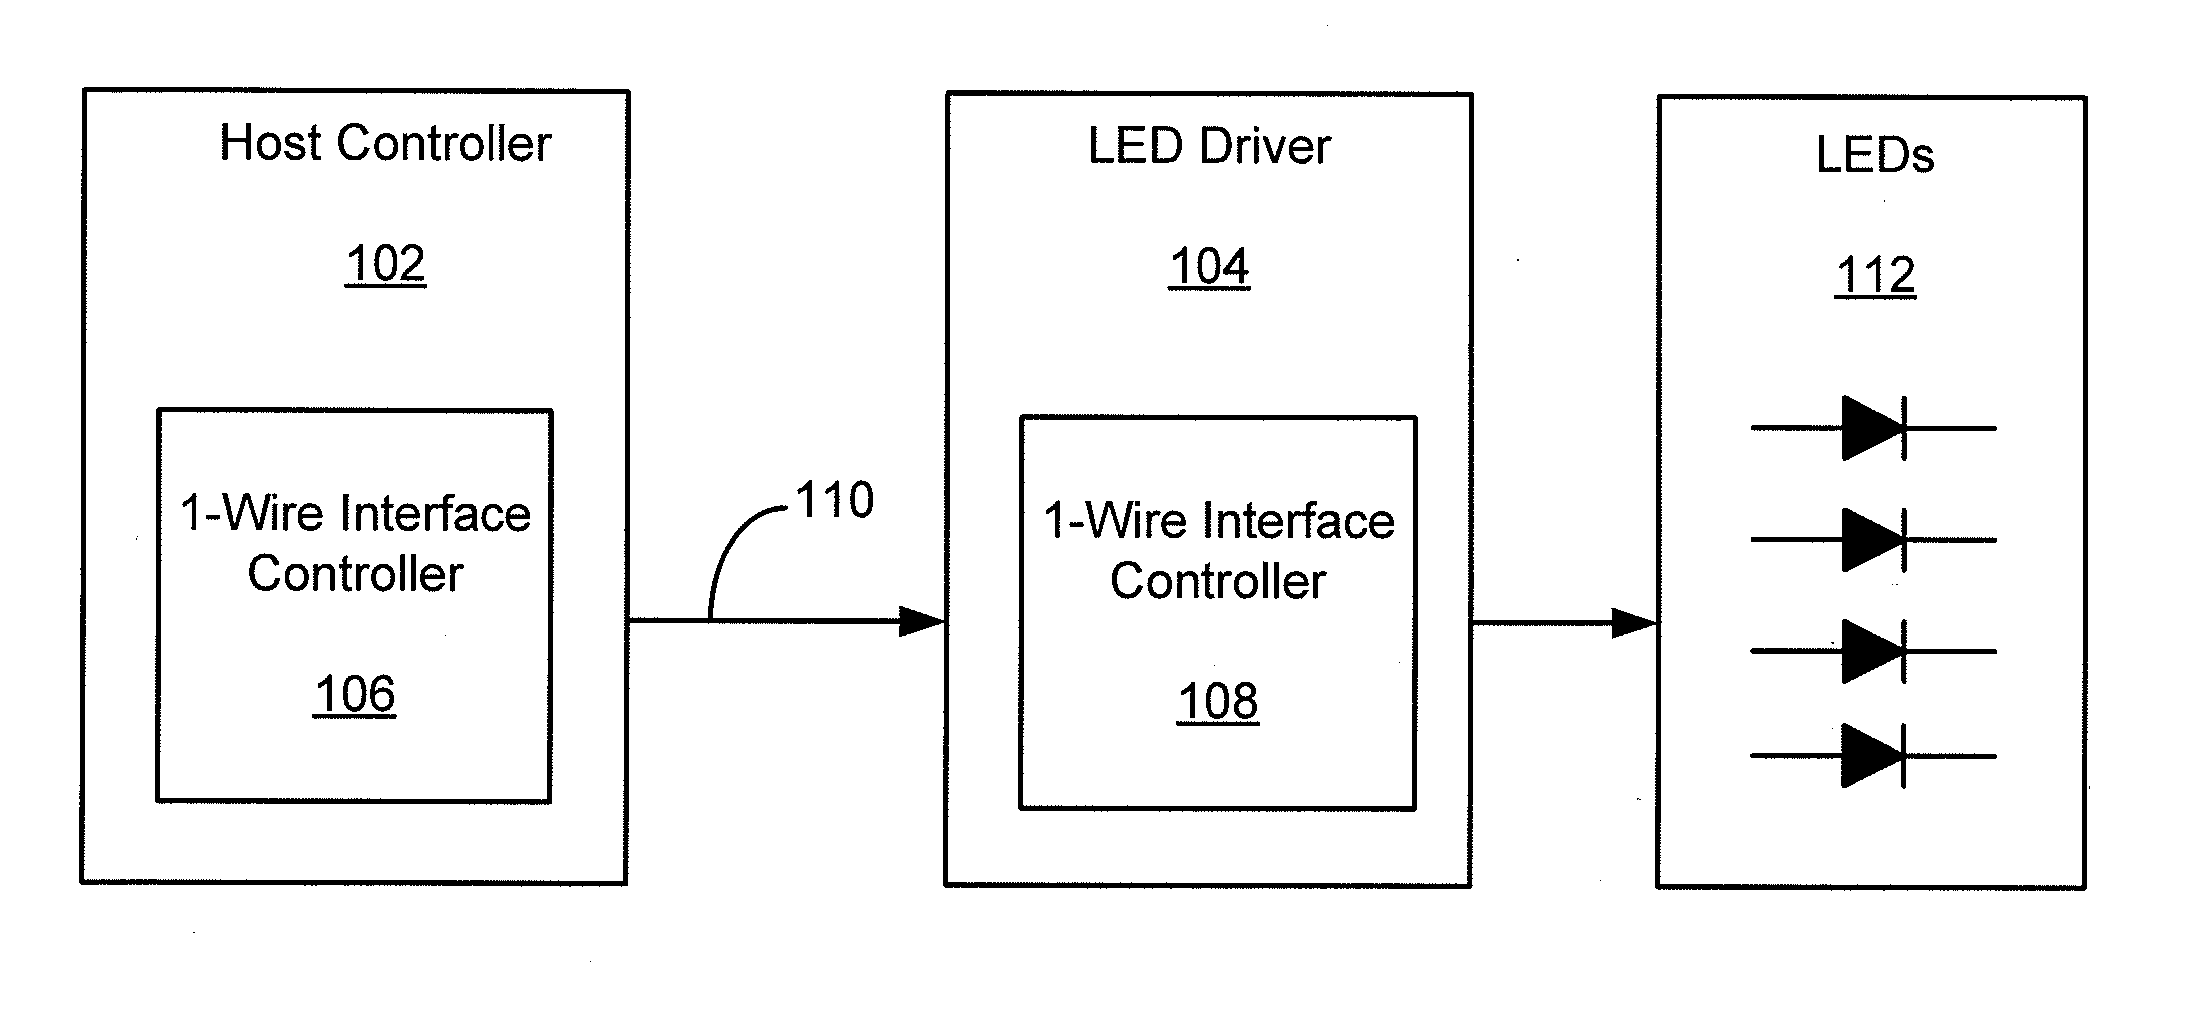 1-Wire Communication Protocol and Interface Circuit for High Voltage Applications